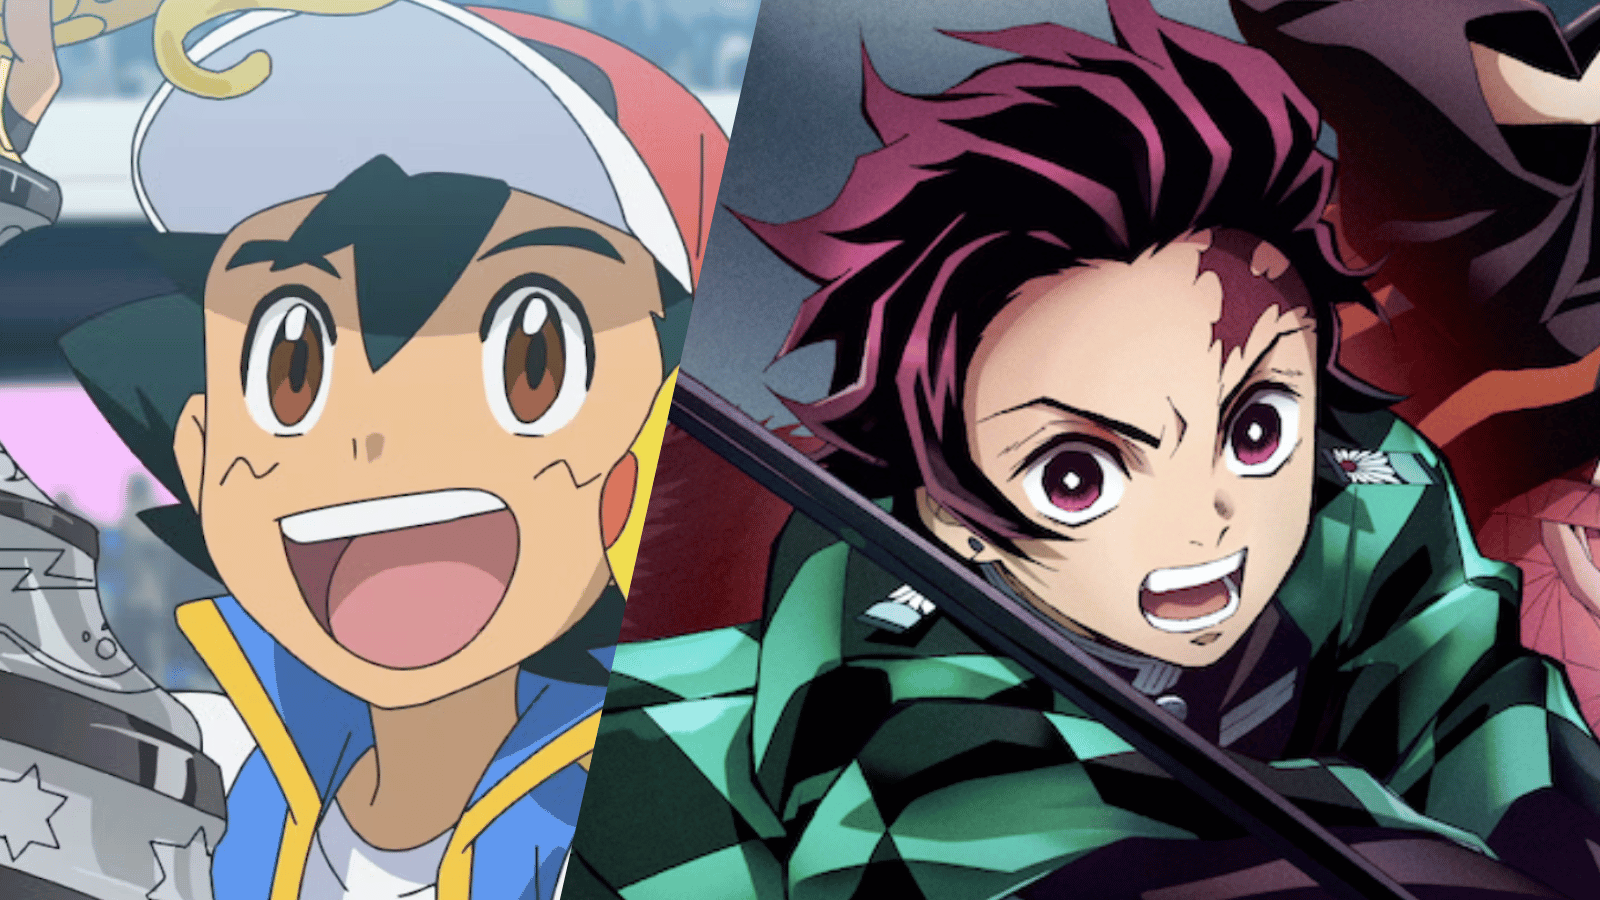 Anime Hits Record-Breaking High in 2022, Thanks to 'Pokémon' and